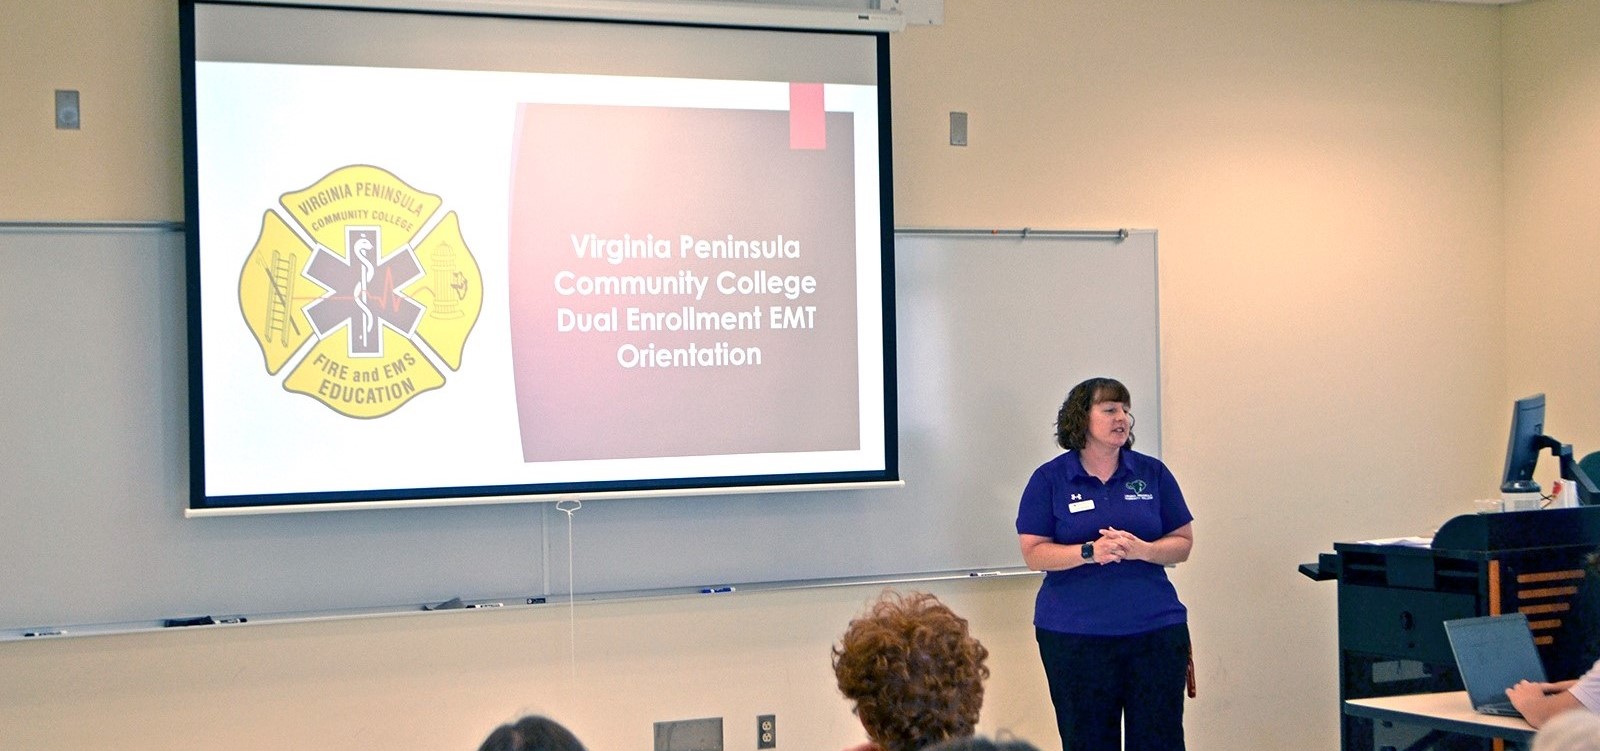 Laura Rondeau, an instructor in the EMS and Fire Science program atd VPCC, led the orientation session.